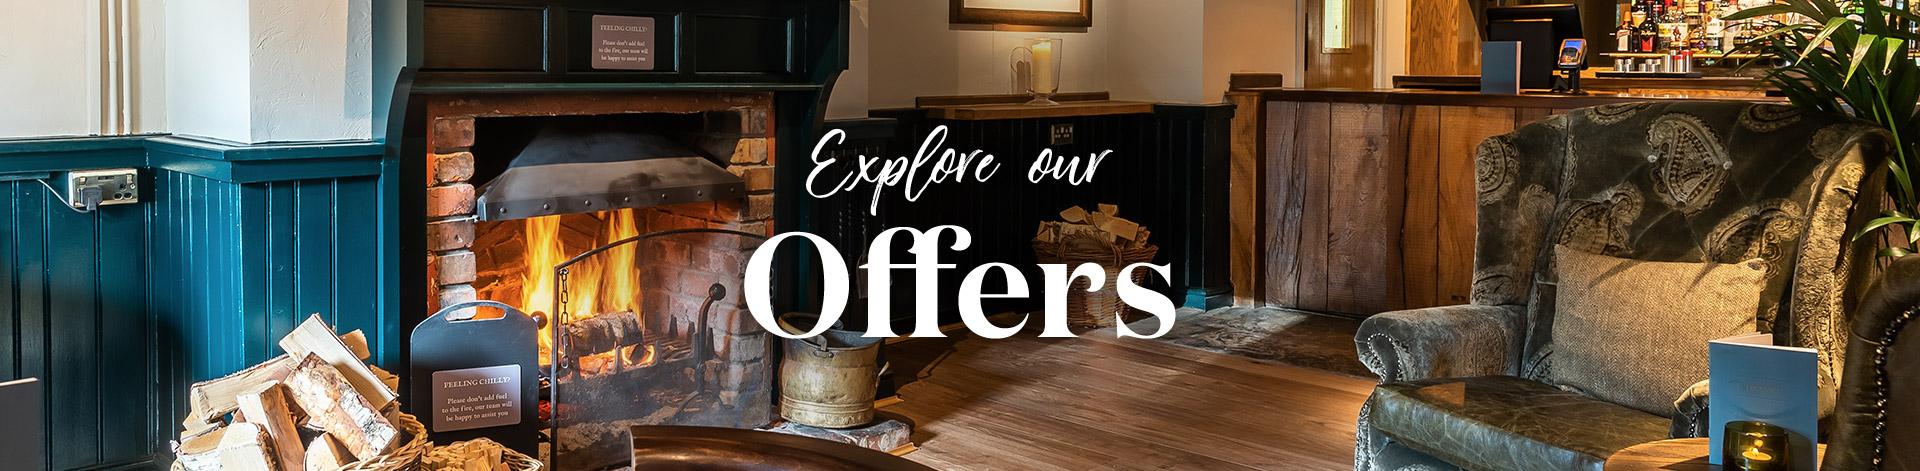 Our latest offers at The Otter